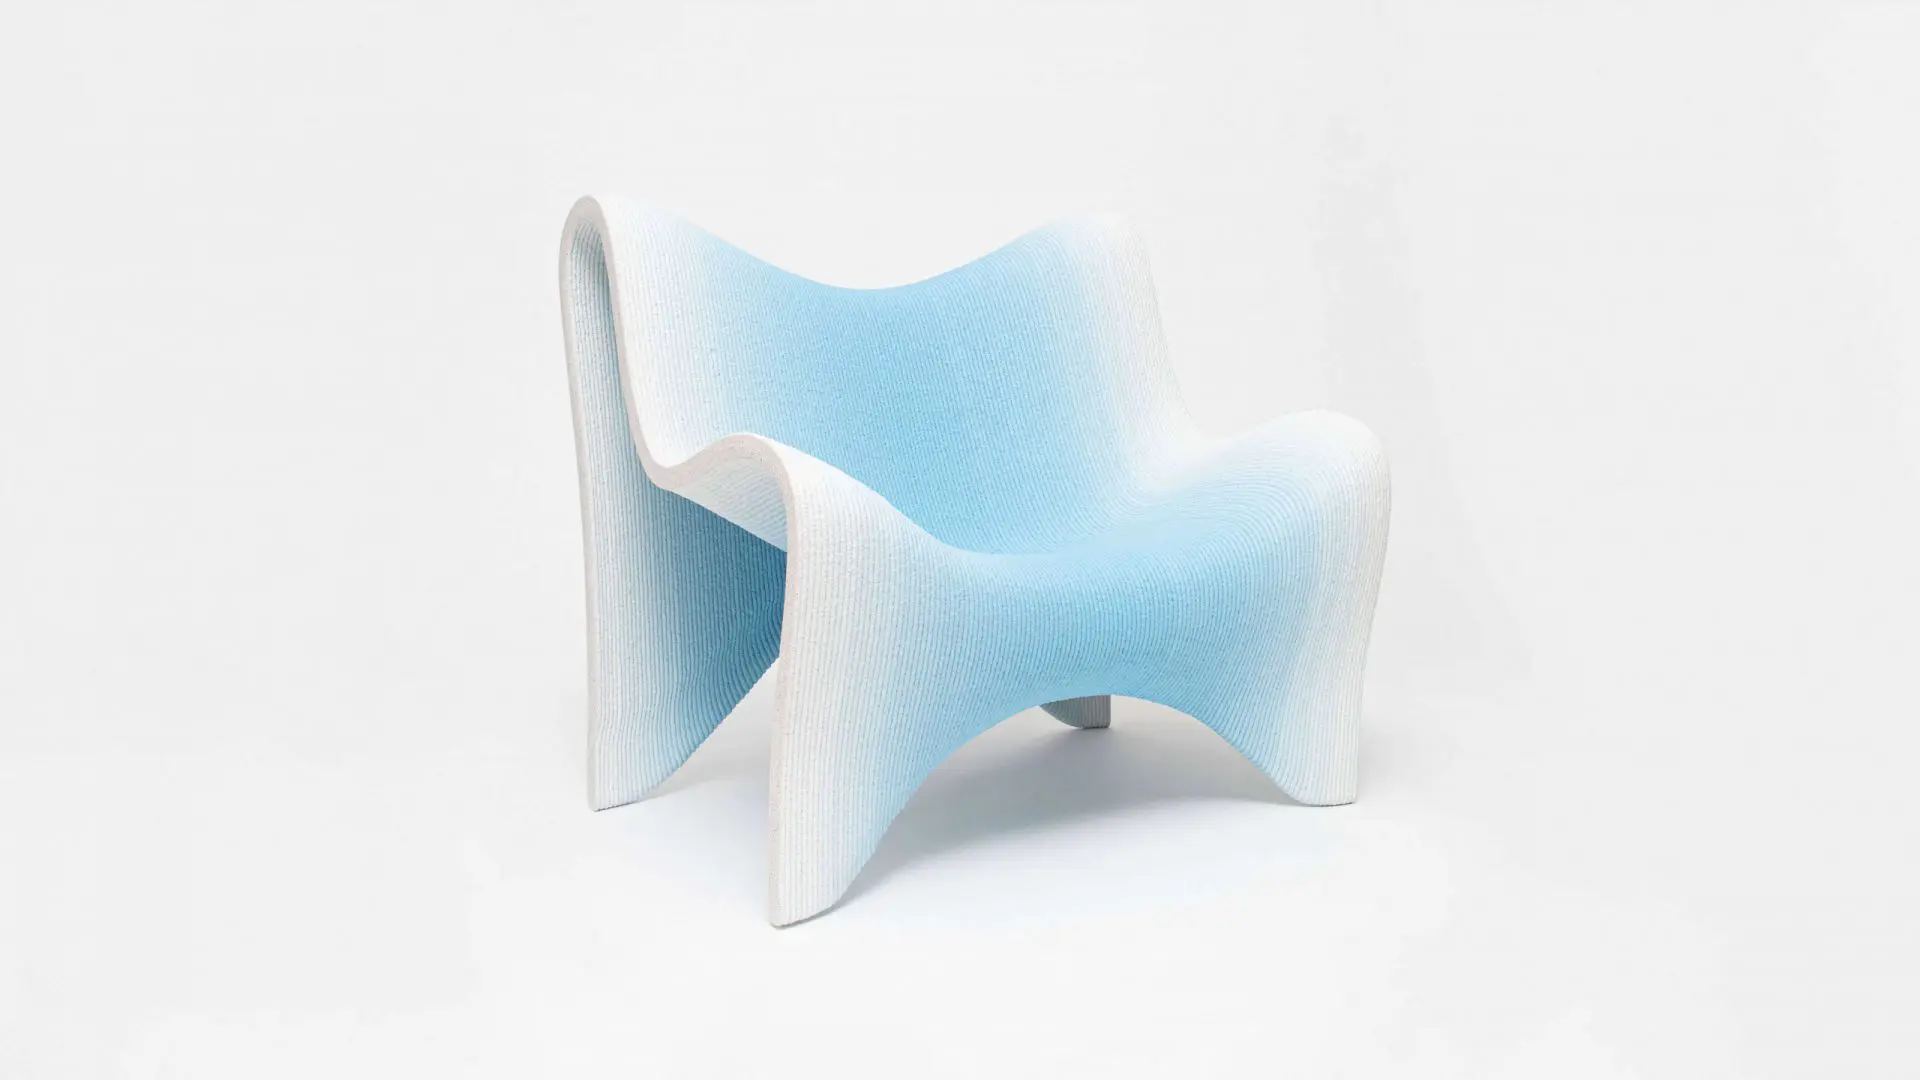 Discover the 3D-printed gradient furniture collection by Philipp Aduatz